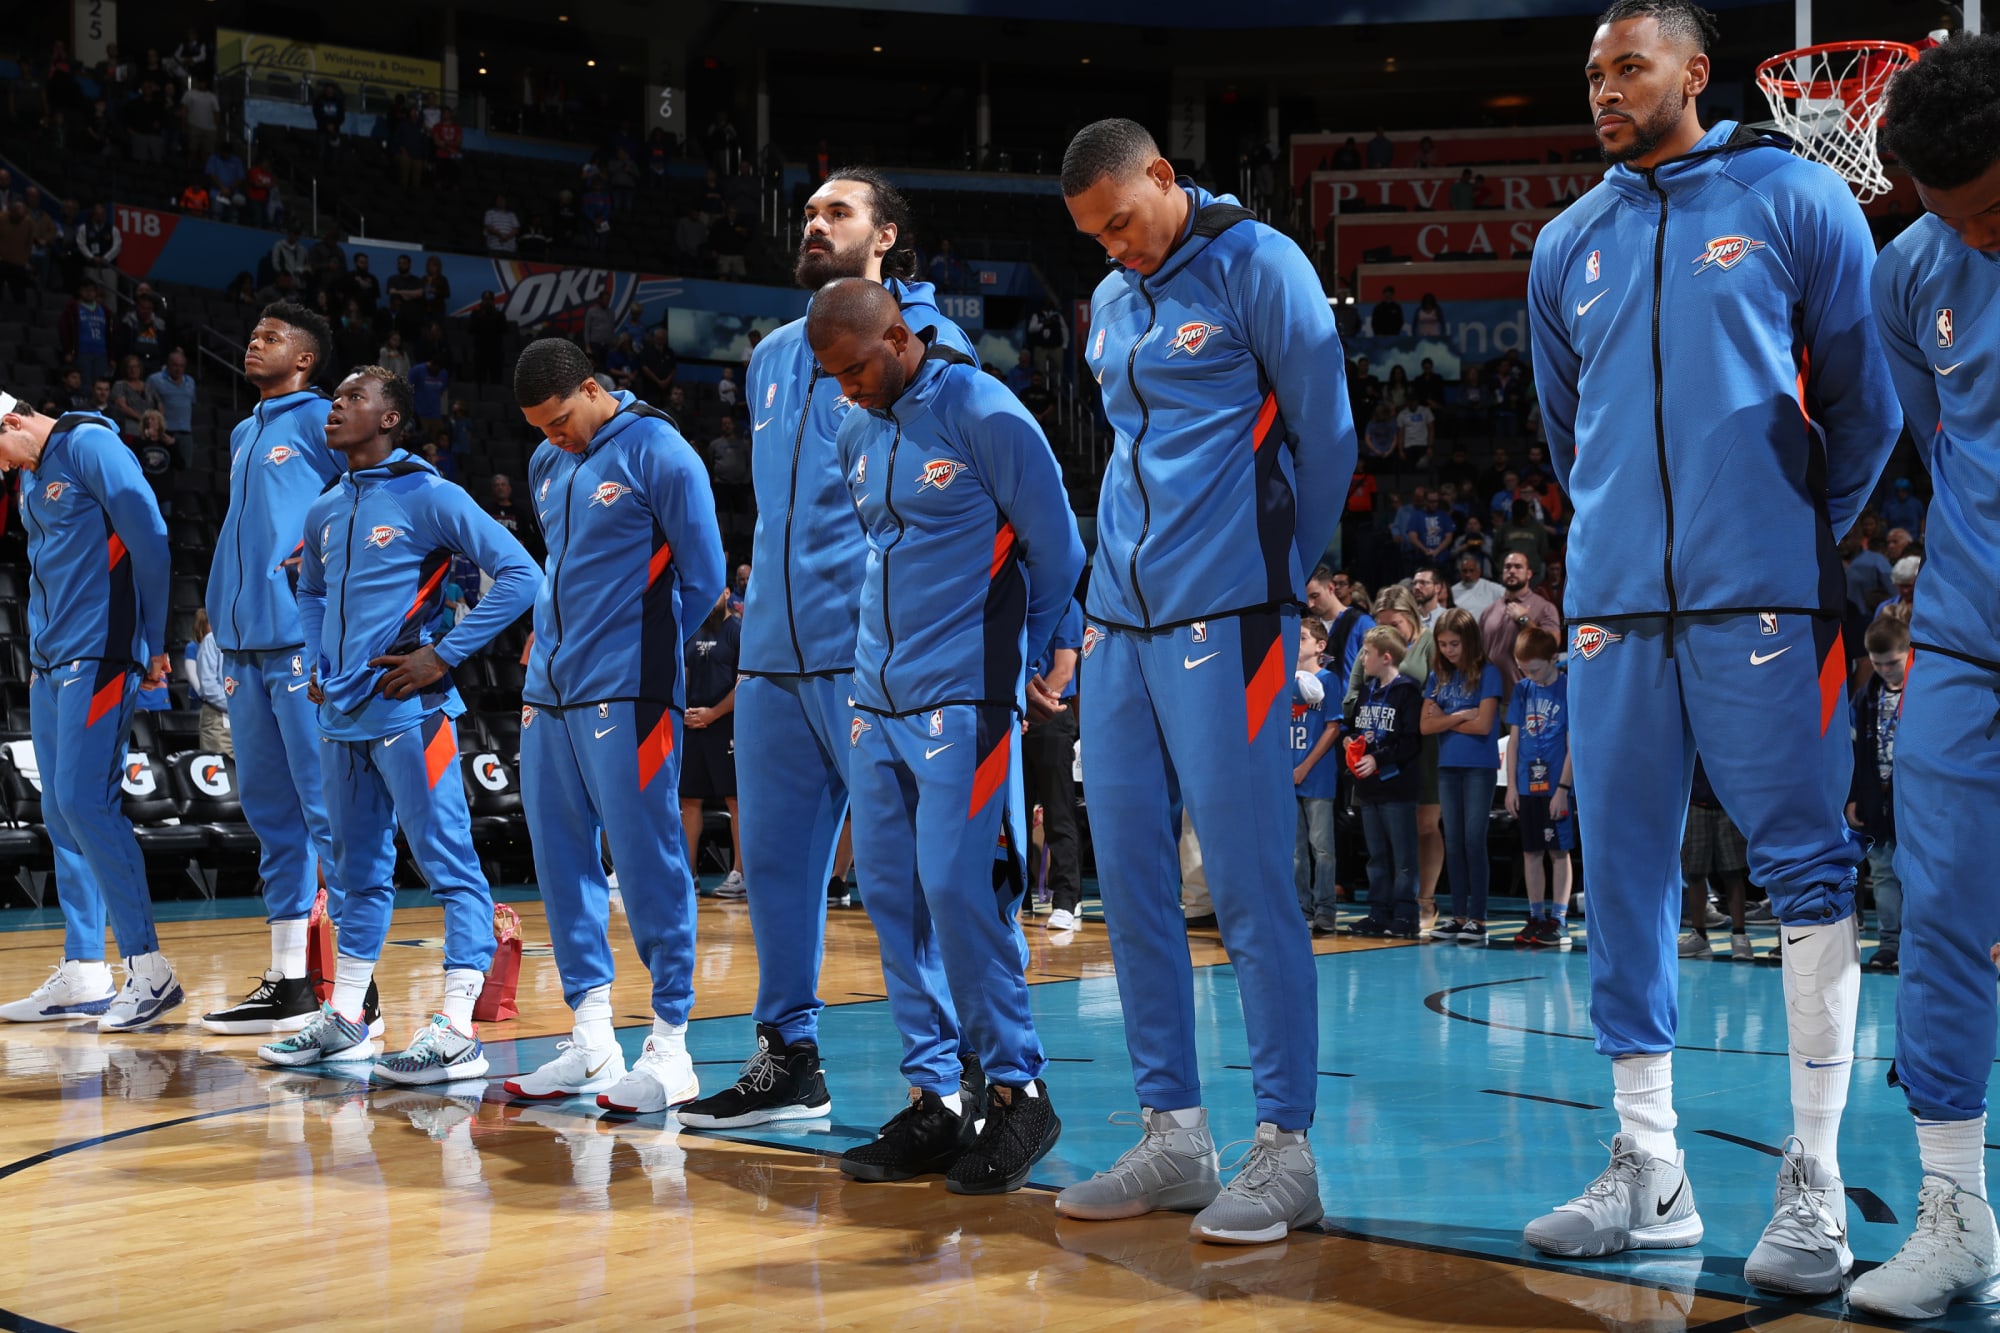 Roundtable sessions OKC Thunder lineups, rotations and reserve units